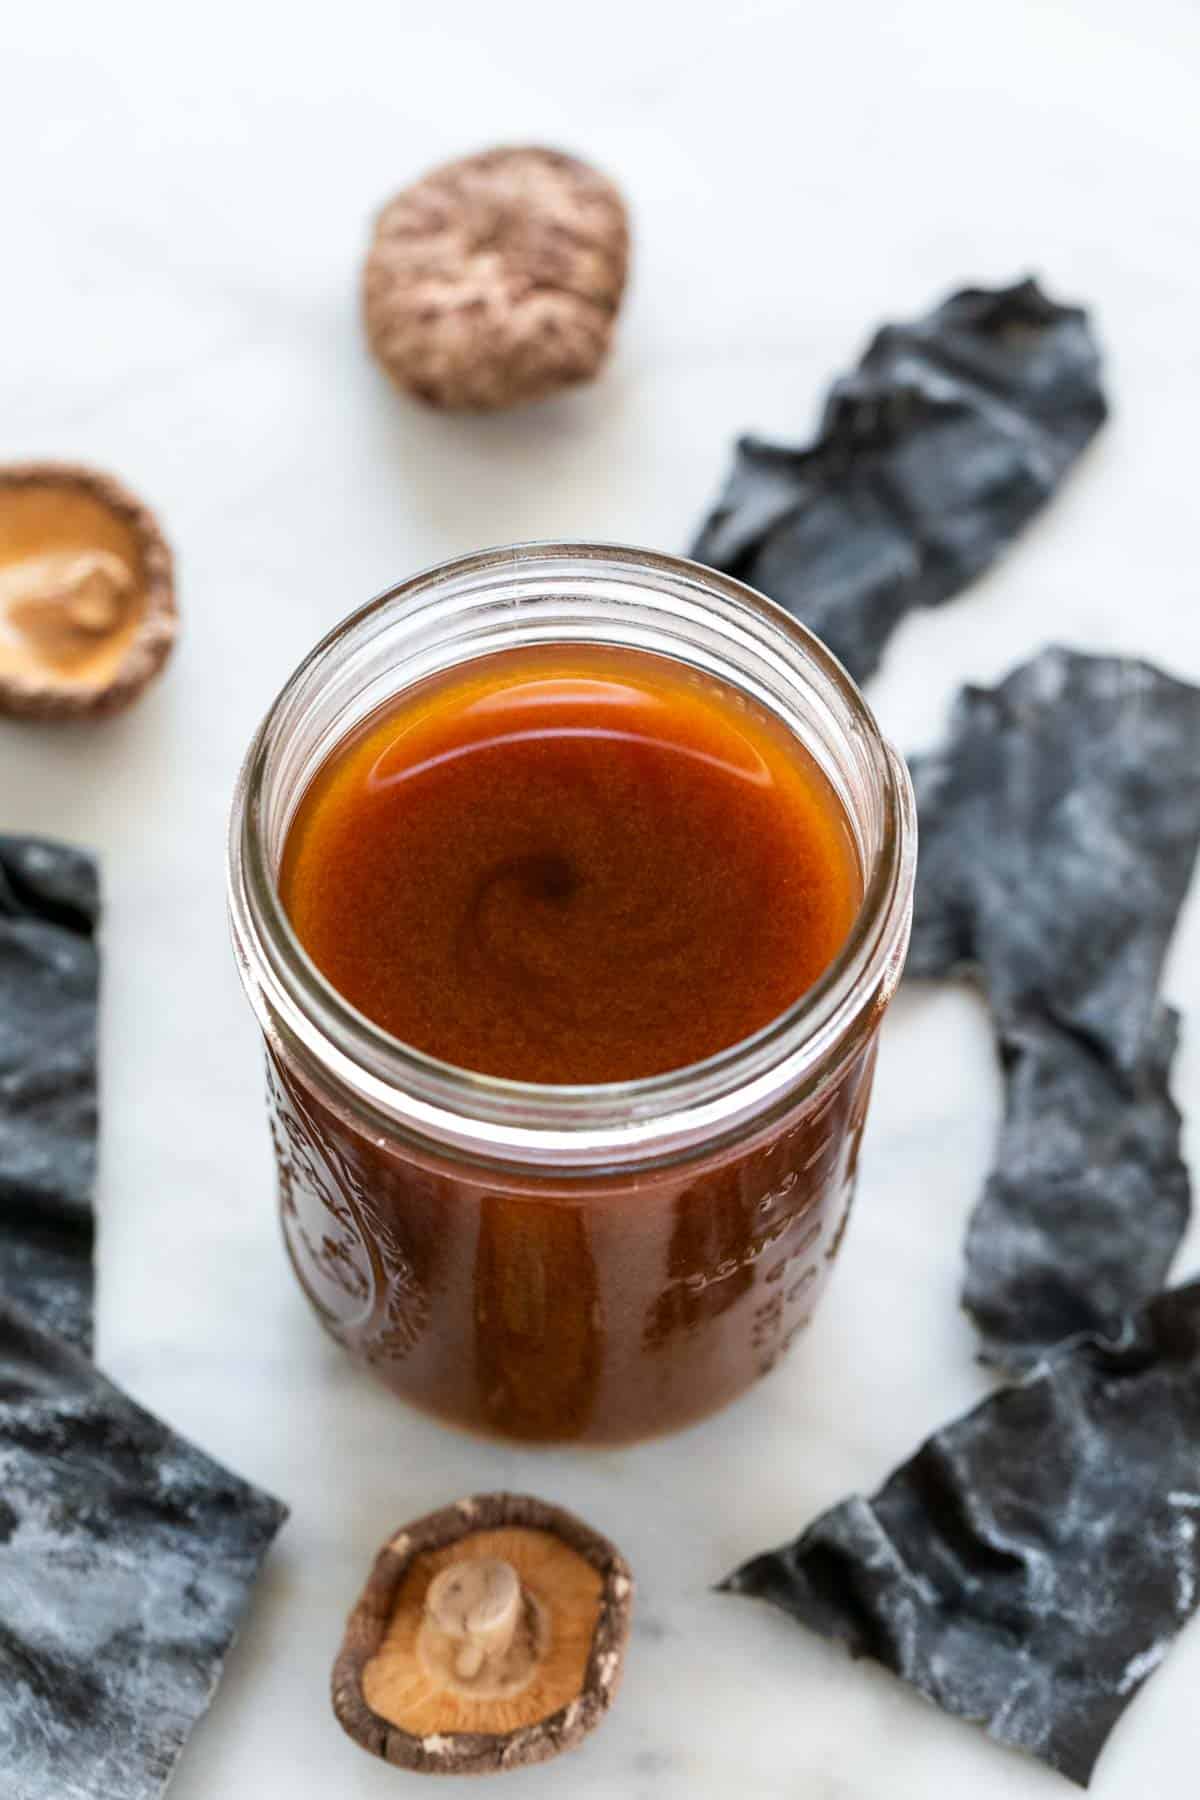 Vegan fish sauce in a jar with seaweed and dried mushrooms in the background.